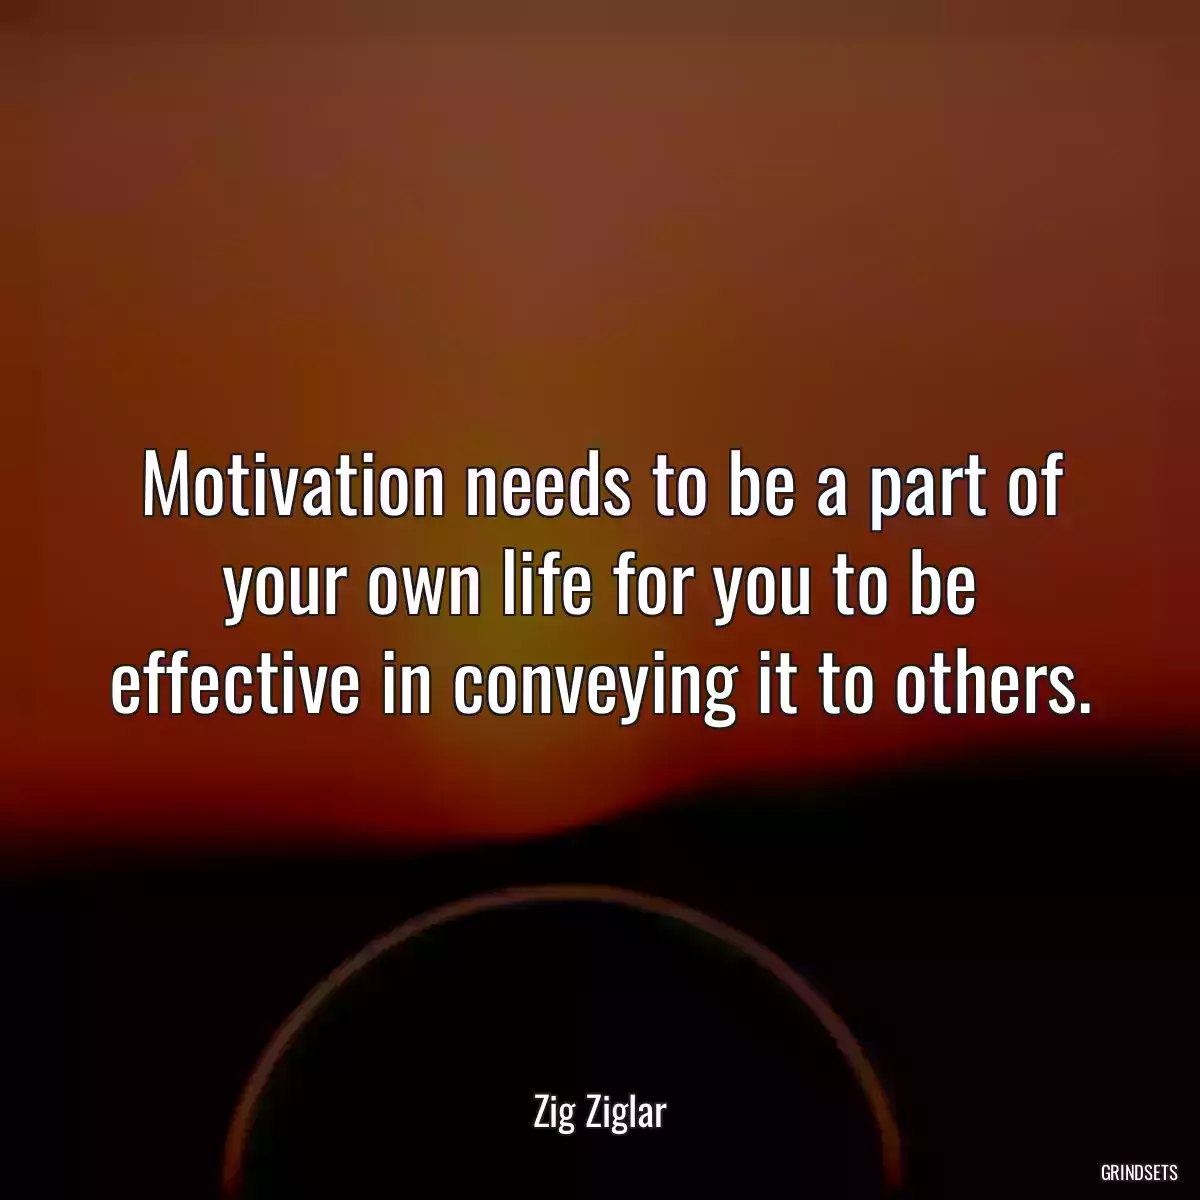 Motivation needs to be a part of your own life for you to be effective in conveying it to others.